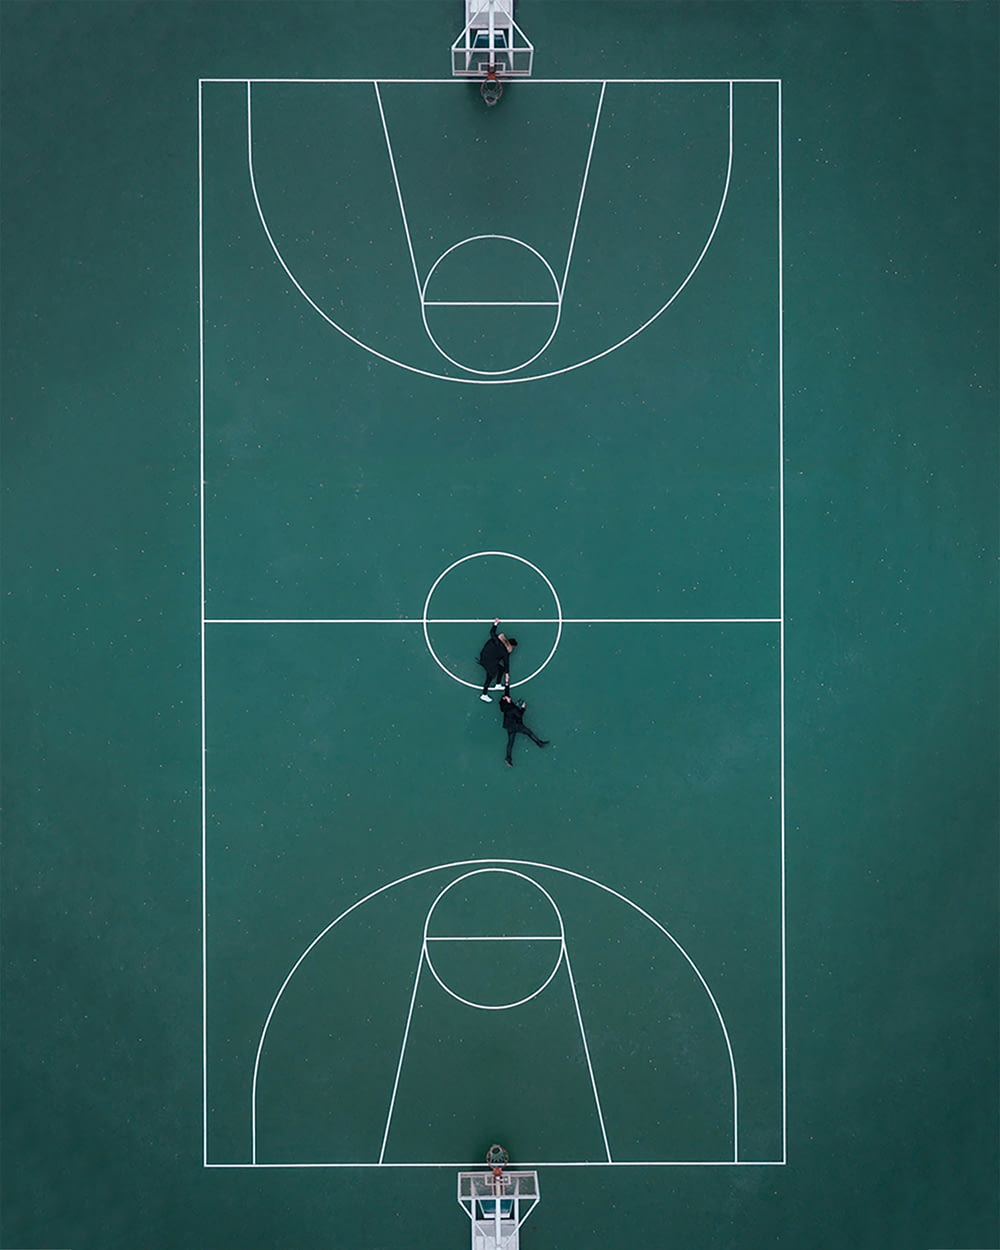 two person in basketball court